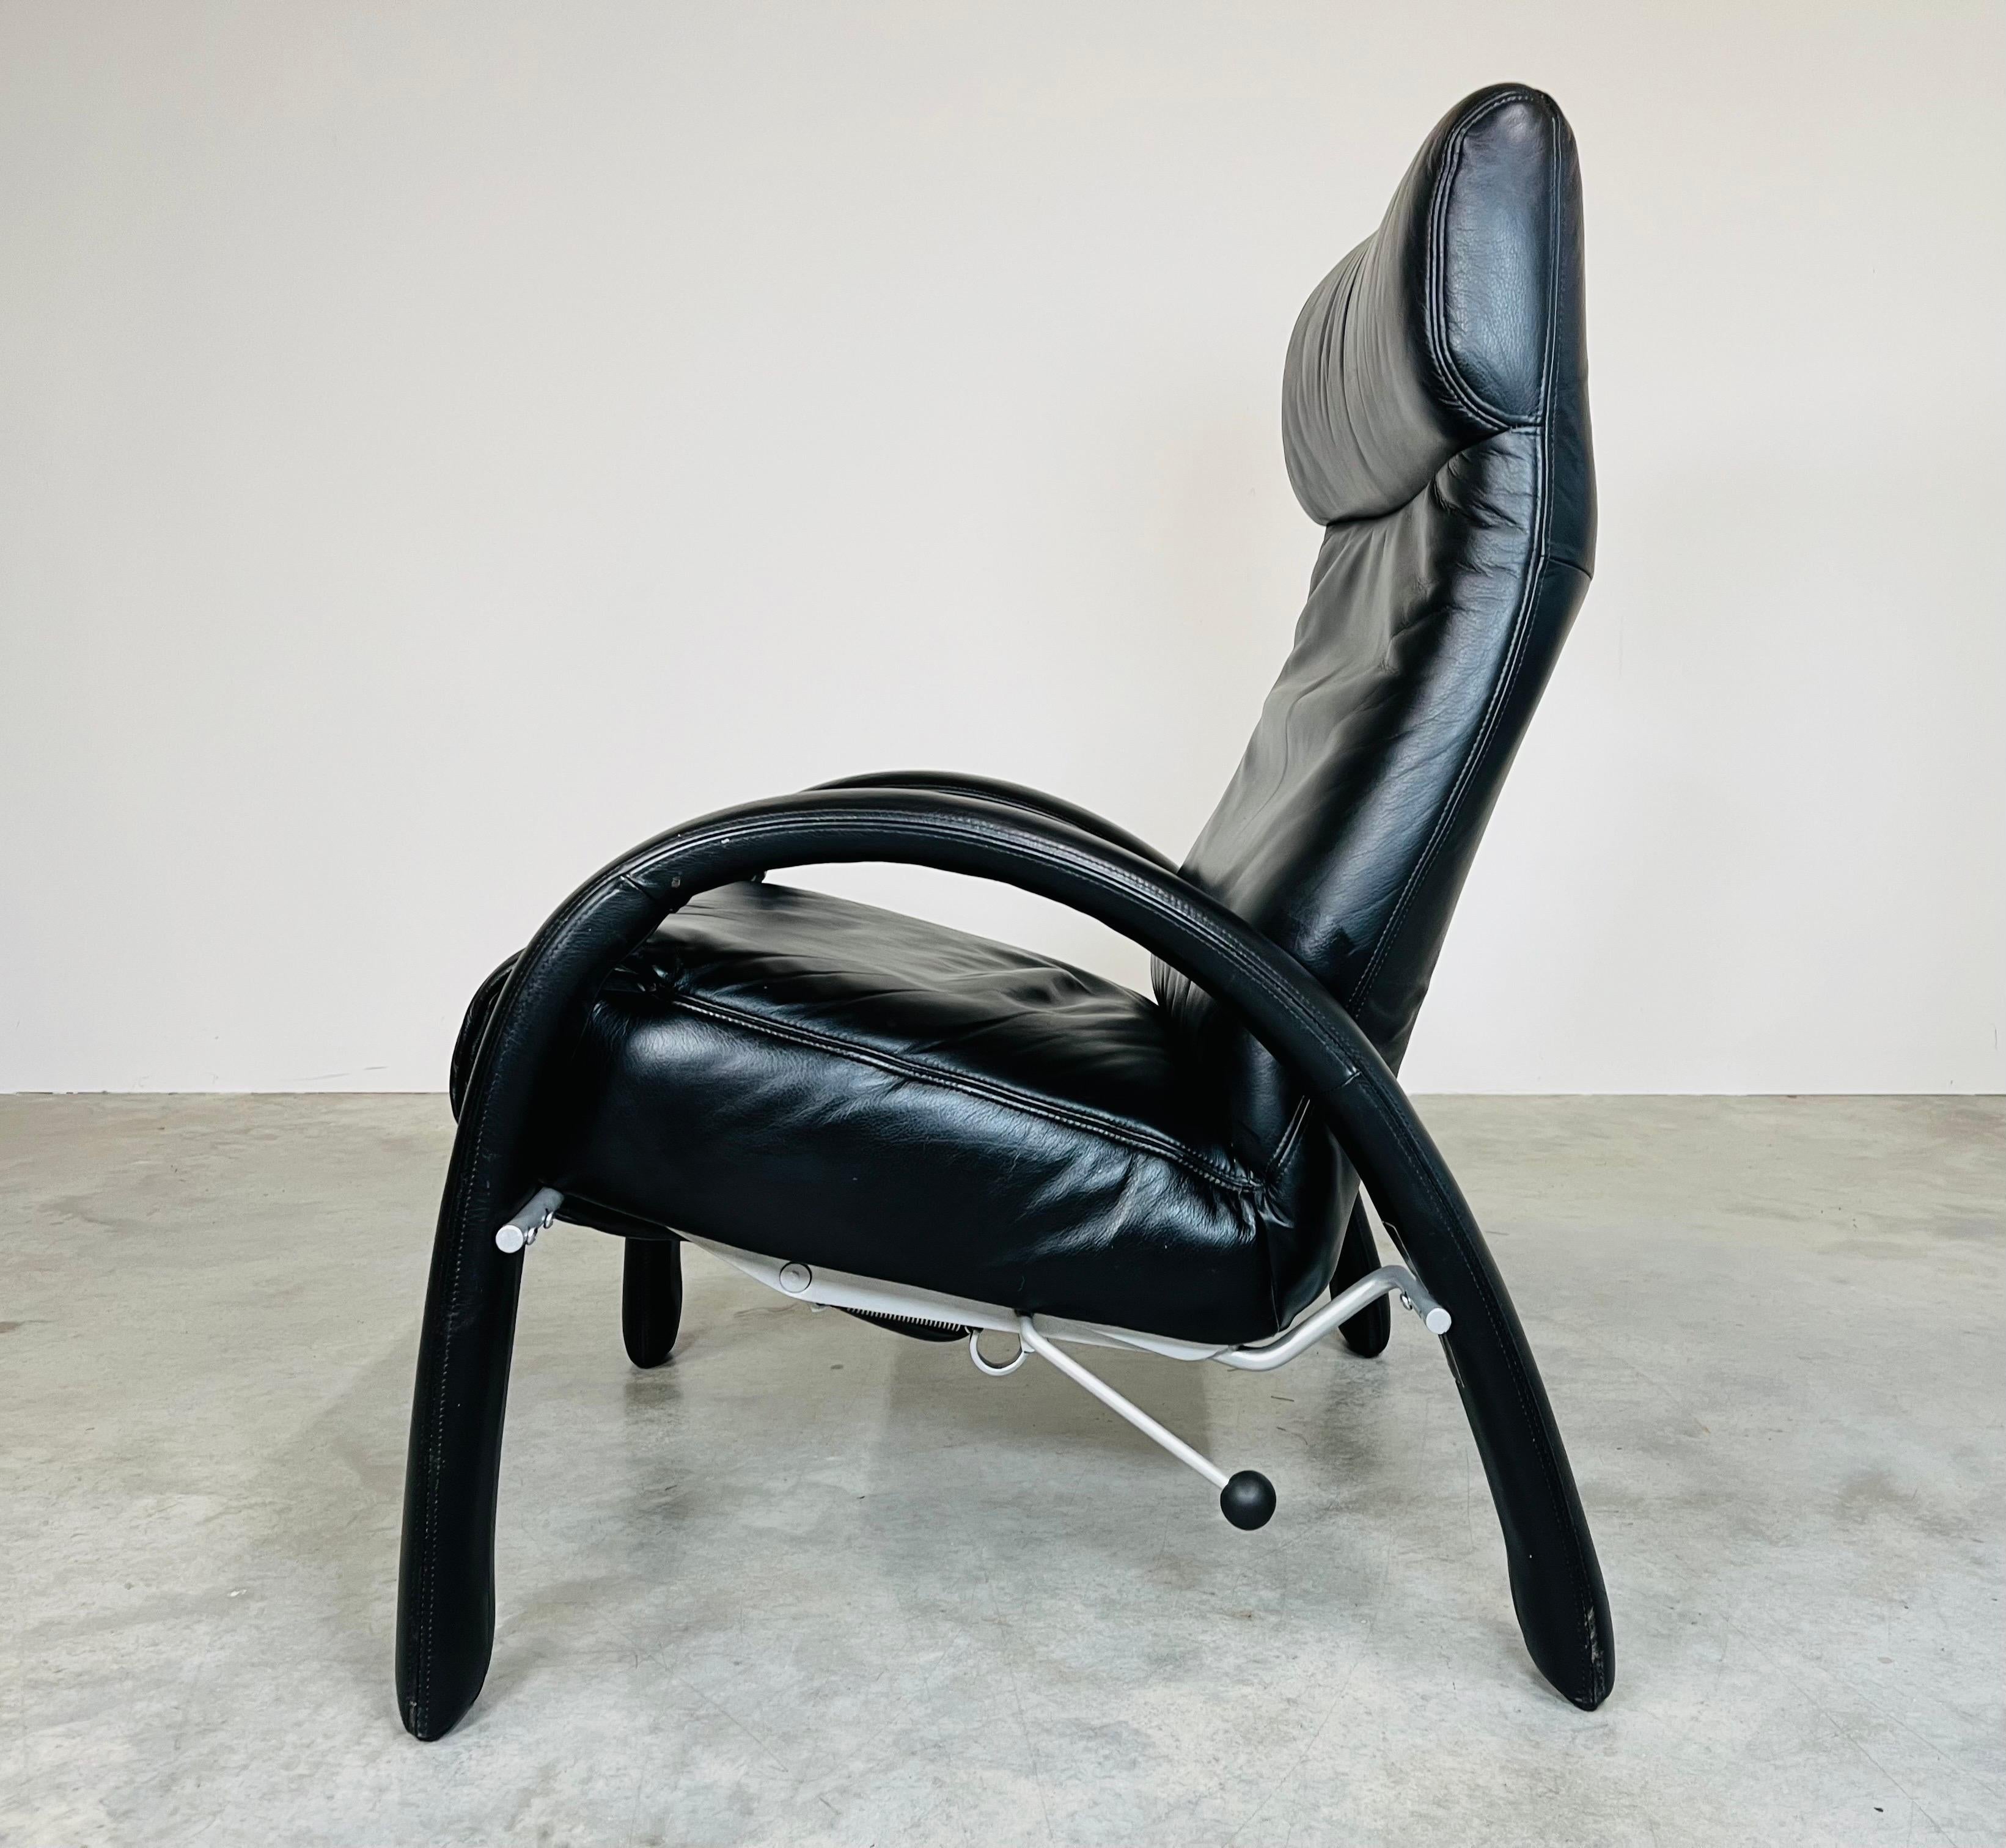 The ‘Bjork’ chair by Lafer of Brazil. 
Sleek streamlined design combined with supple leather and smooth diverse reclining function make this an incredibly comfortable chair with modern elegance. 
In excellent condition having well maintained leather